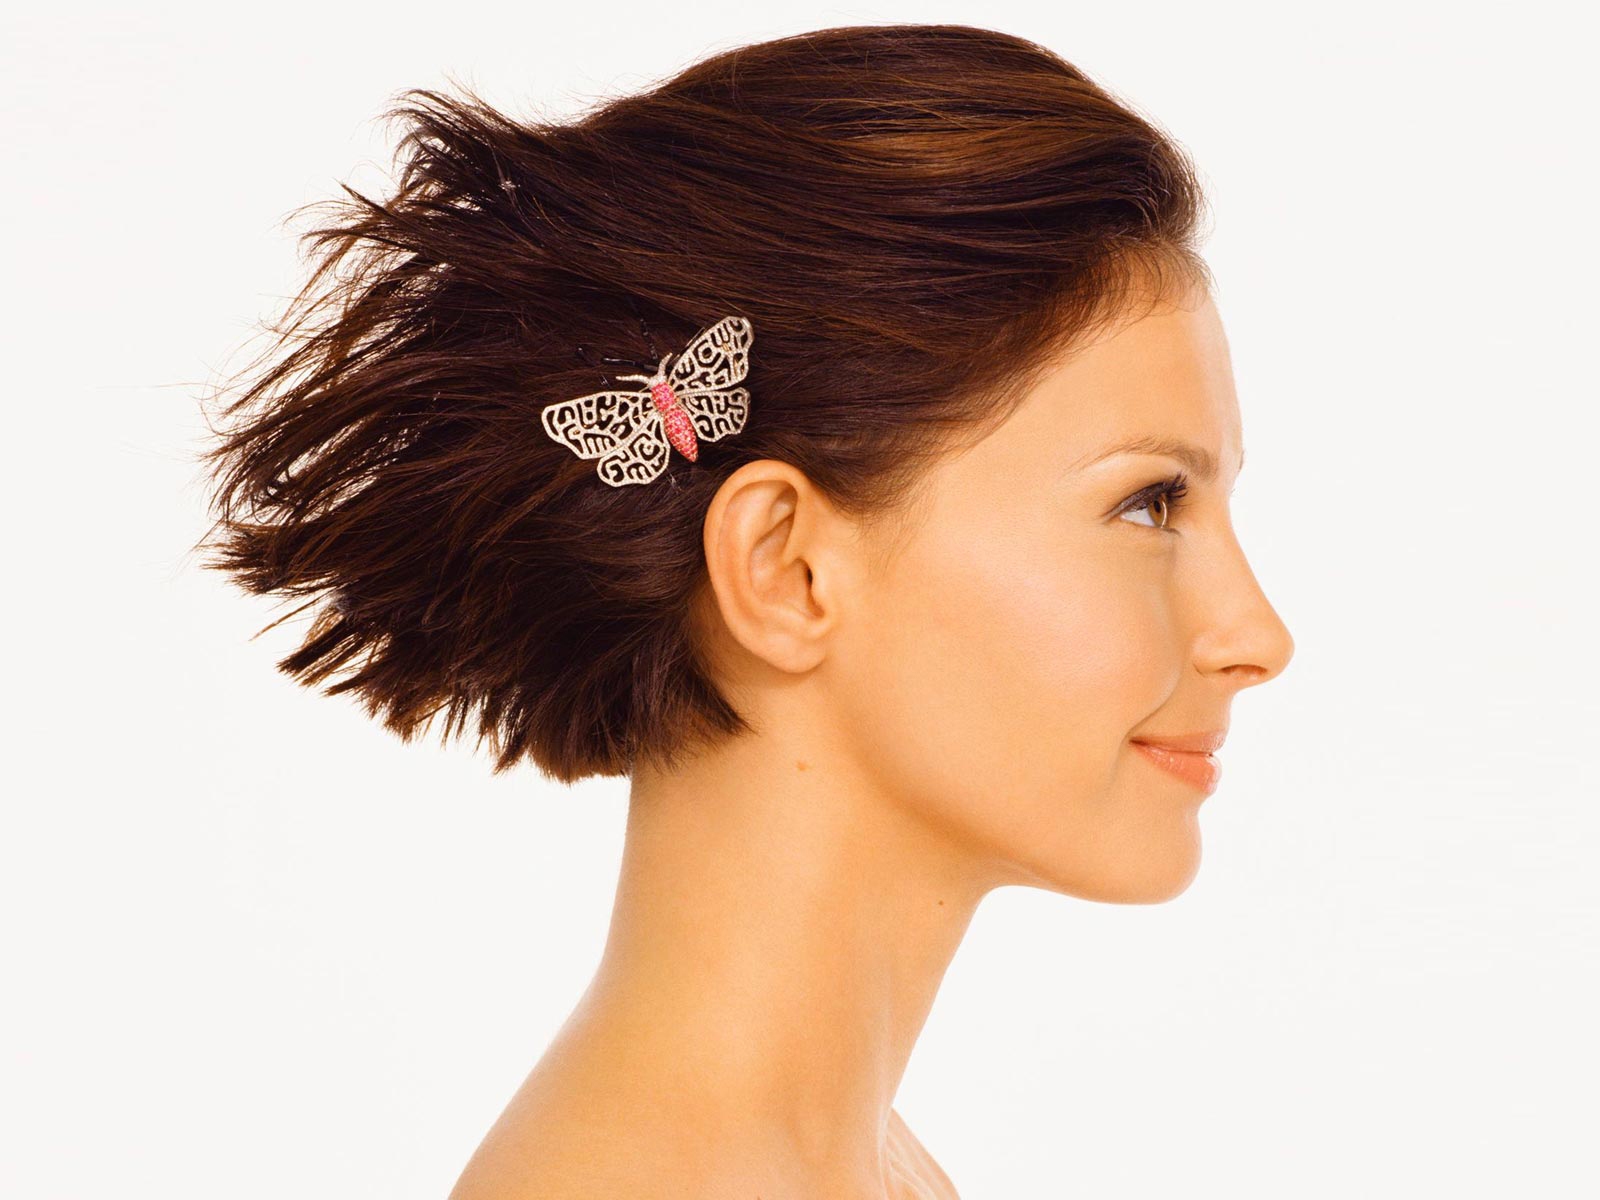 Ashley Judd Profile Look for 1600 x 1200 resolution